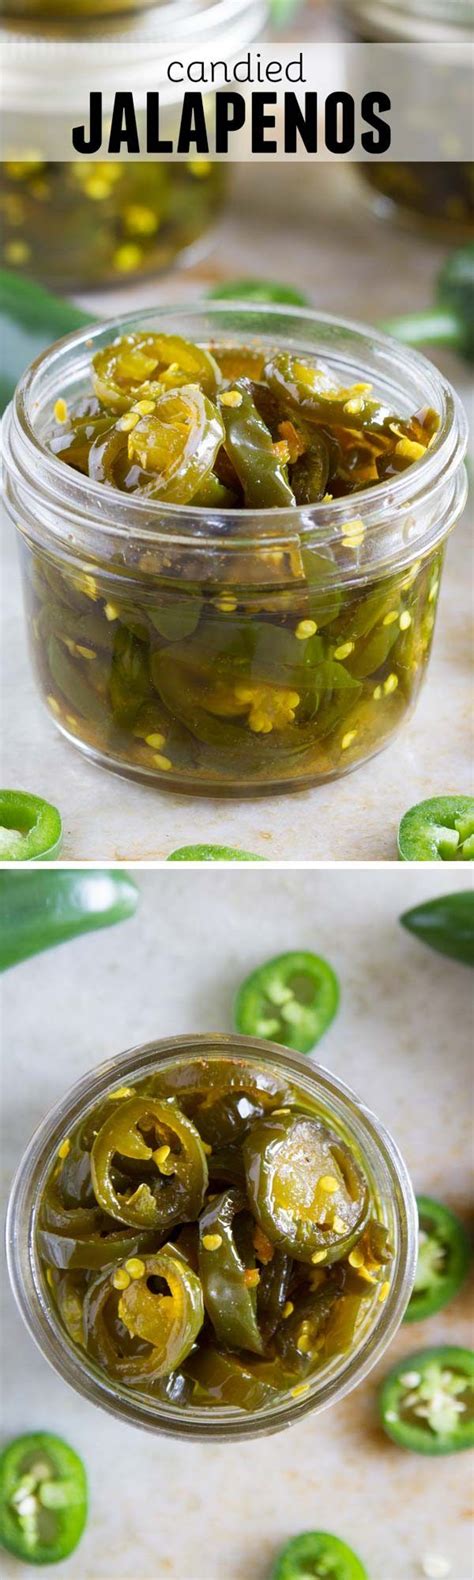 Candied Jalapenos Recipe Food Stuffed Peppers Candied Jalapenos